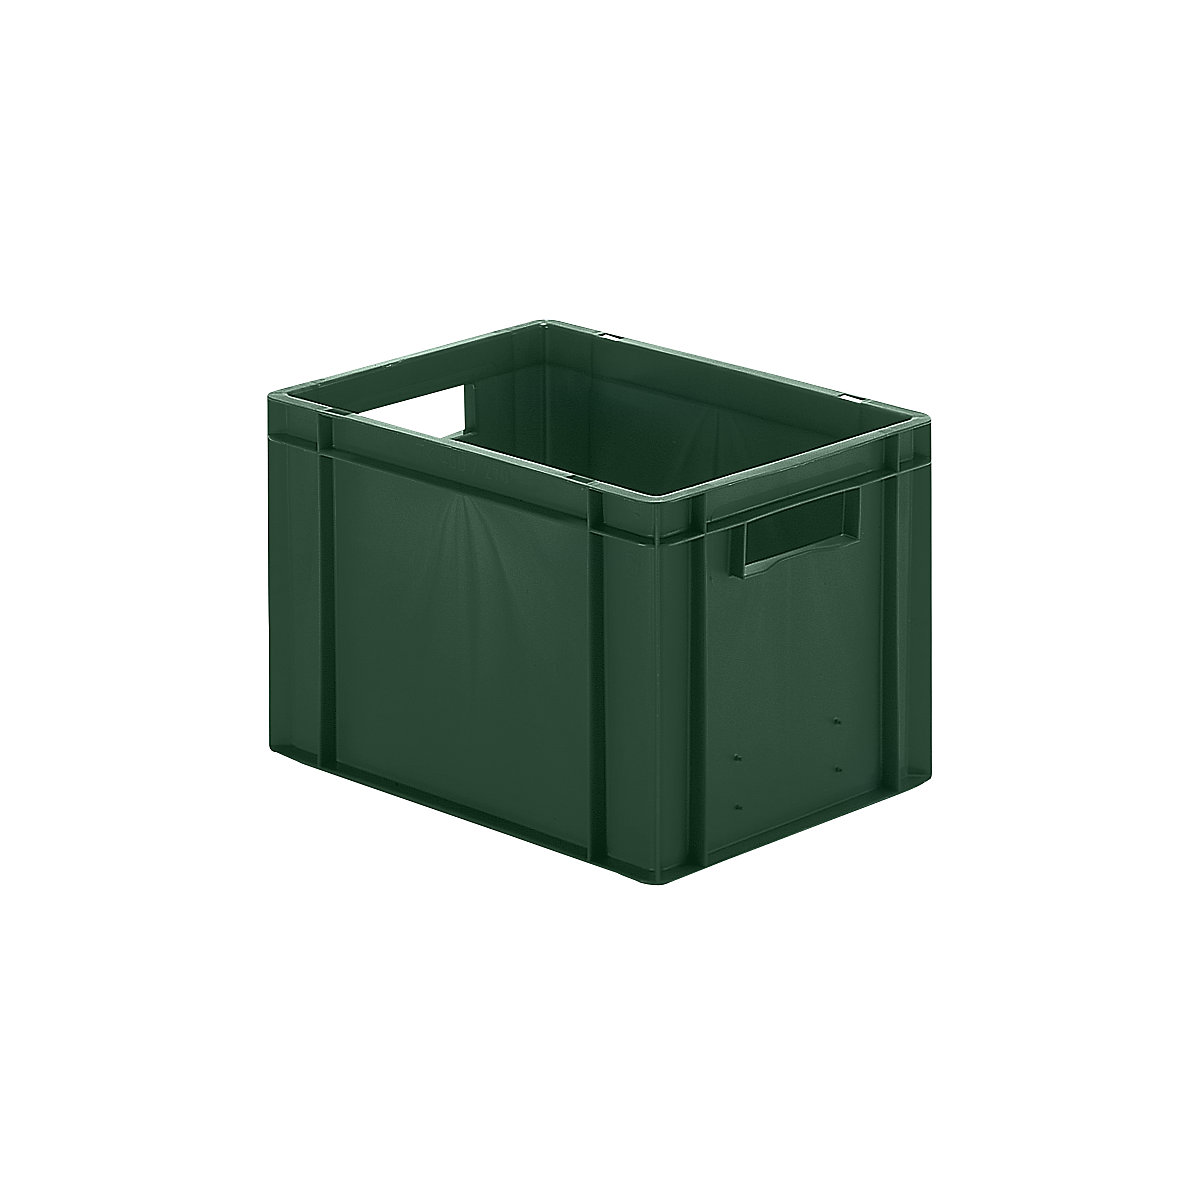 Euro stacking container, closed walls and base, LxWxH 400 x 300 x 270 mm, green, pack of 5